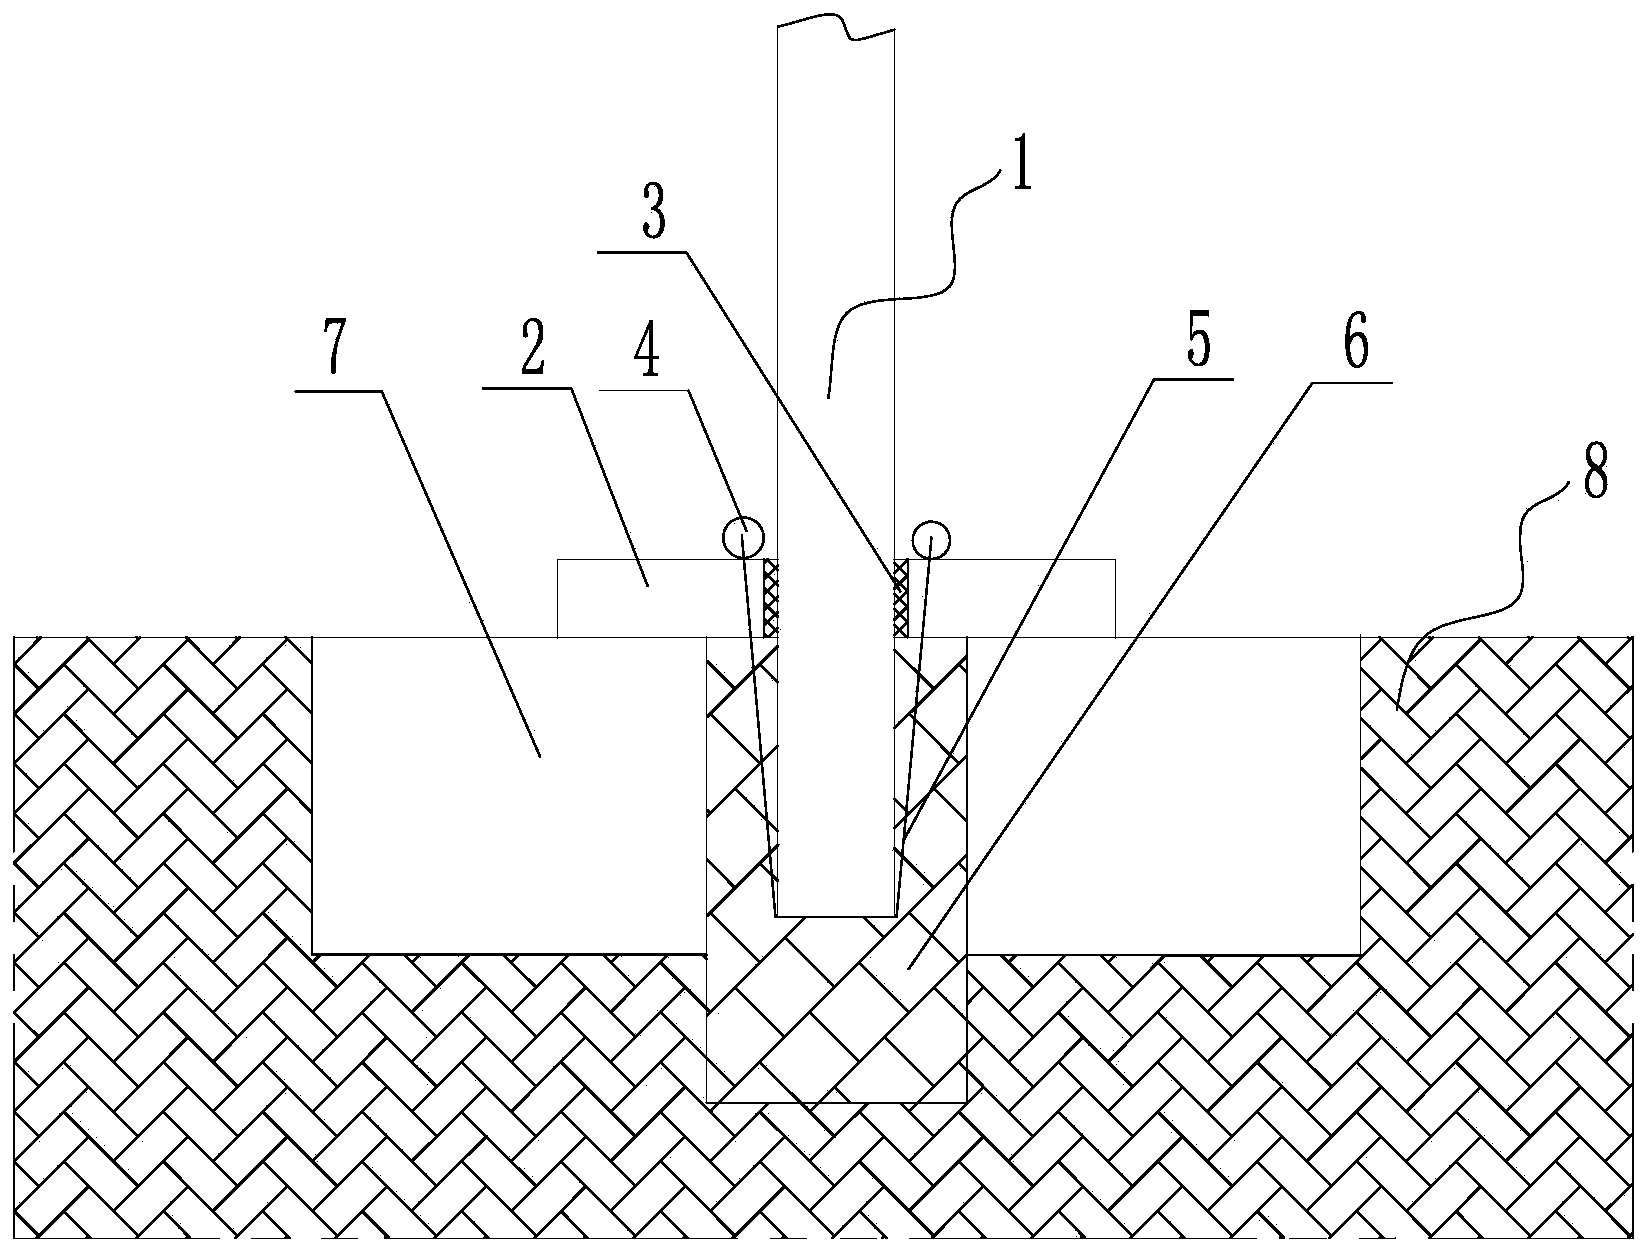 Vertical rod reinforcement device used for earth excavation and vertical rod reinforcement method